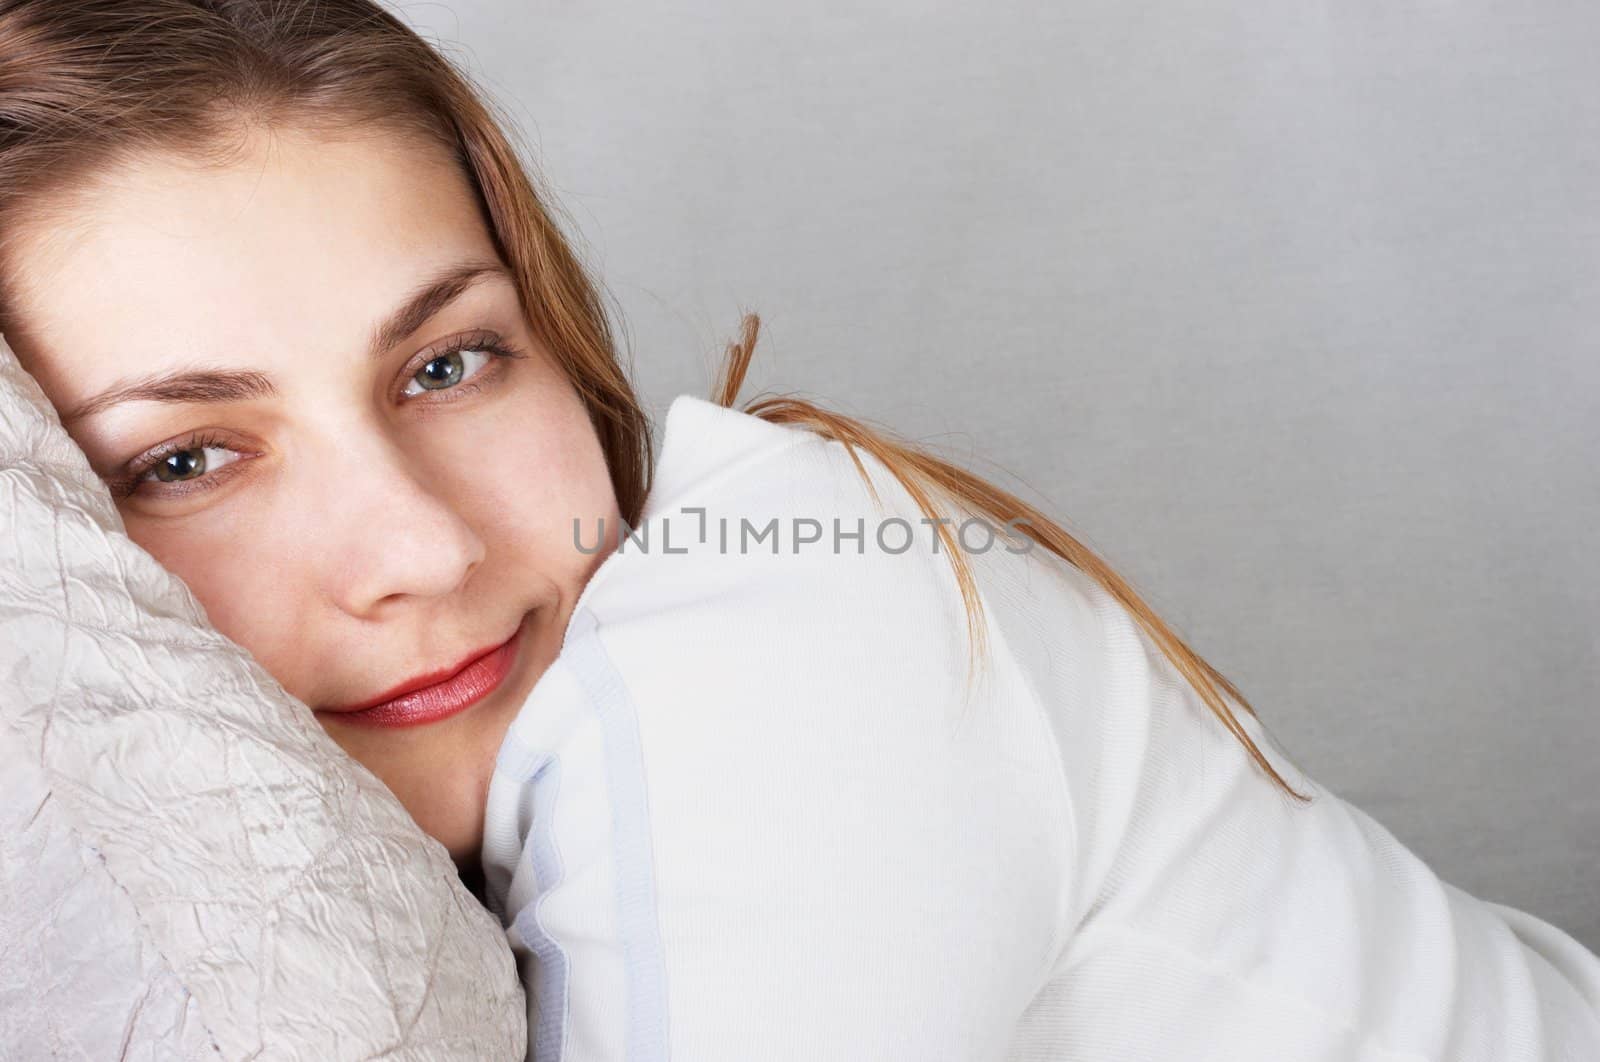 Daydreaming young girl in white lying on pillow.